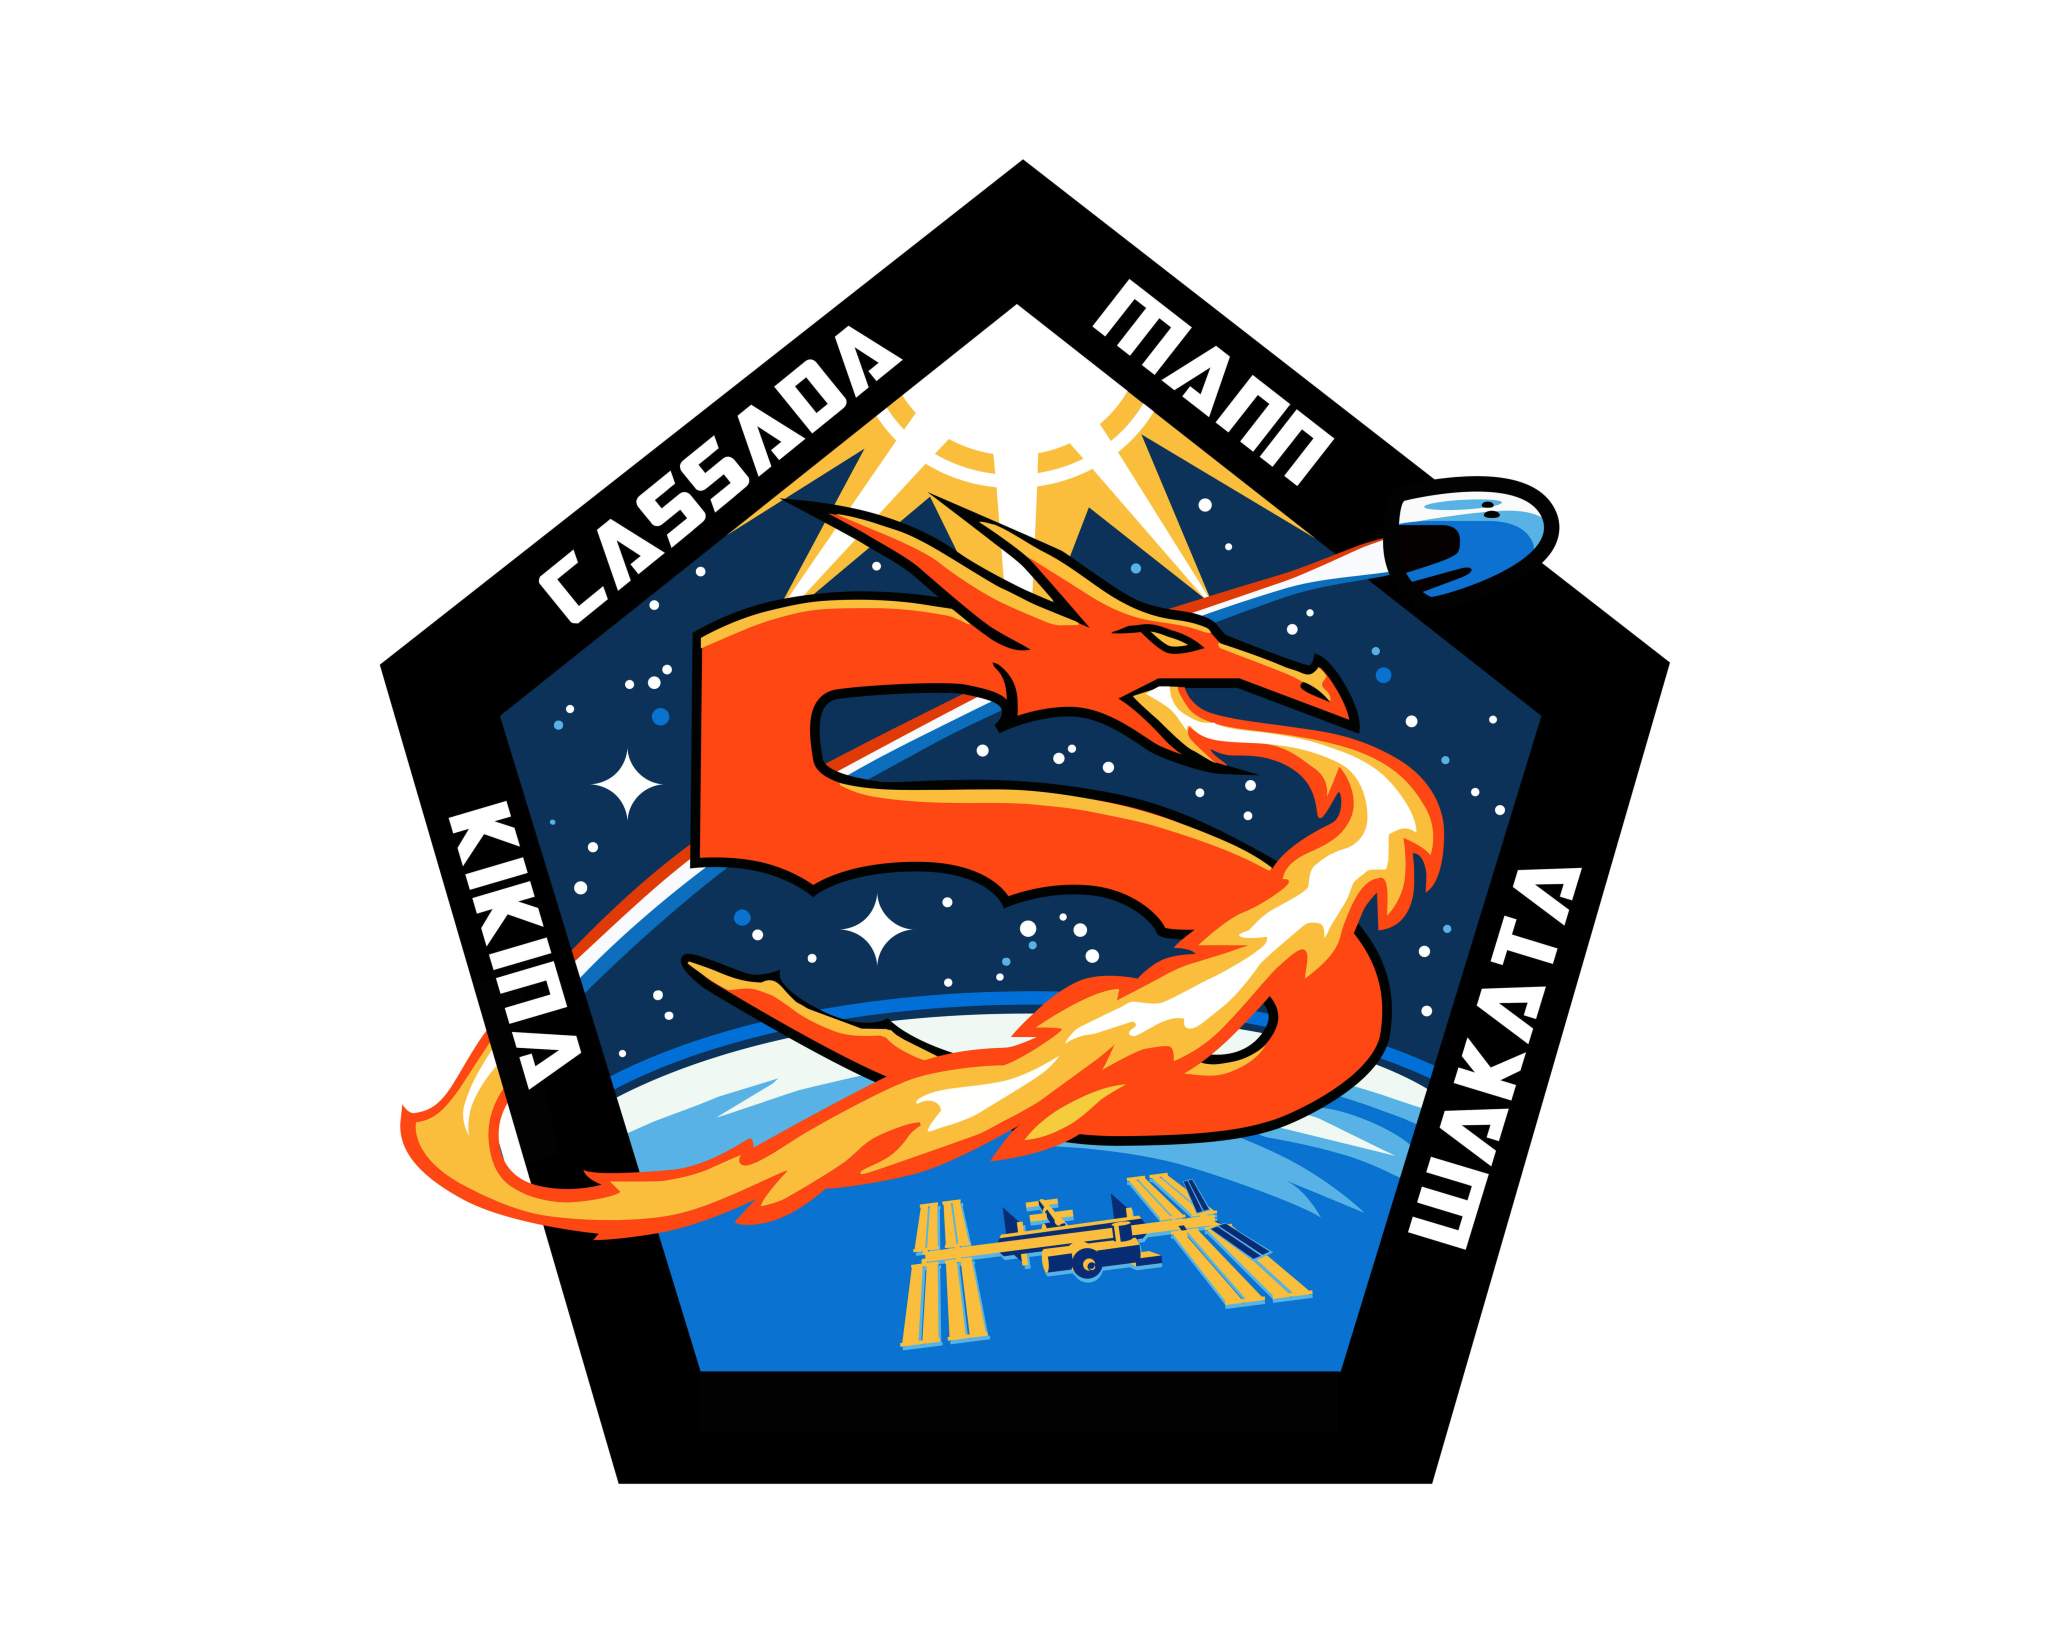 The mission patch for NASA's SpaceX Crew-5 mission.